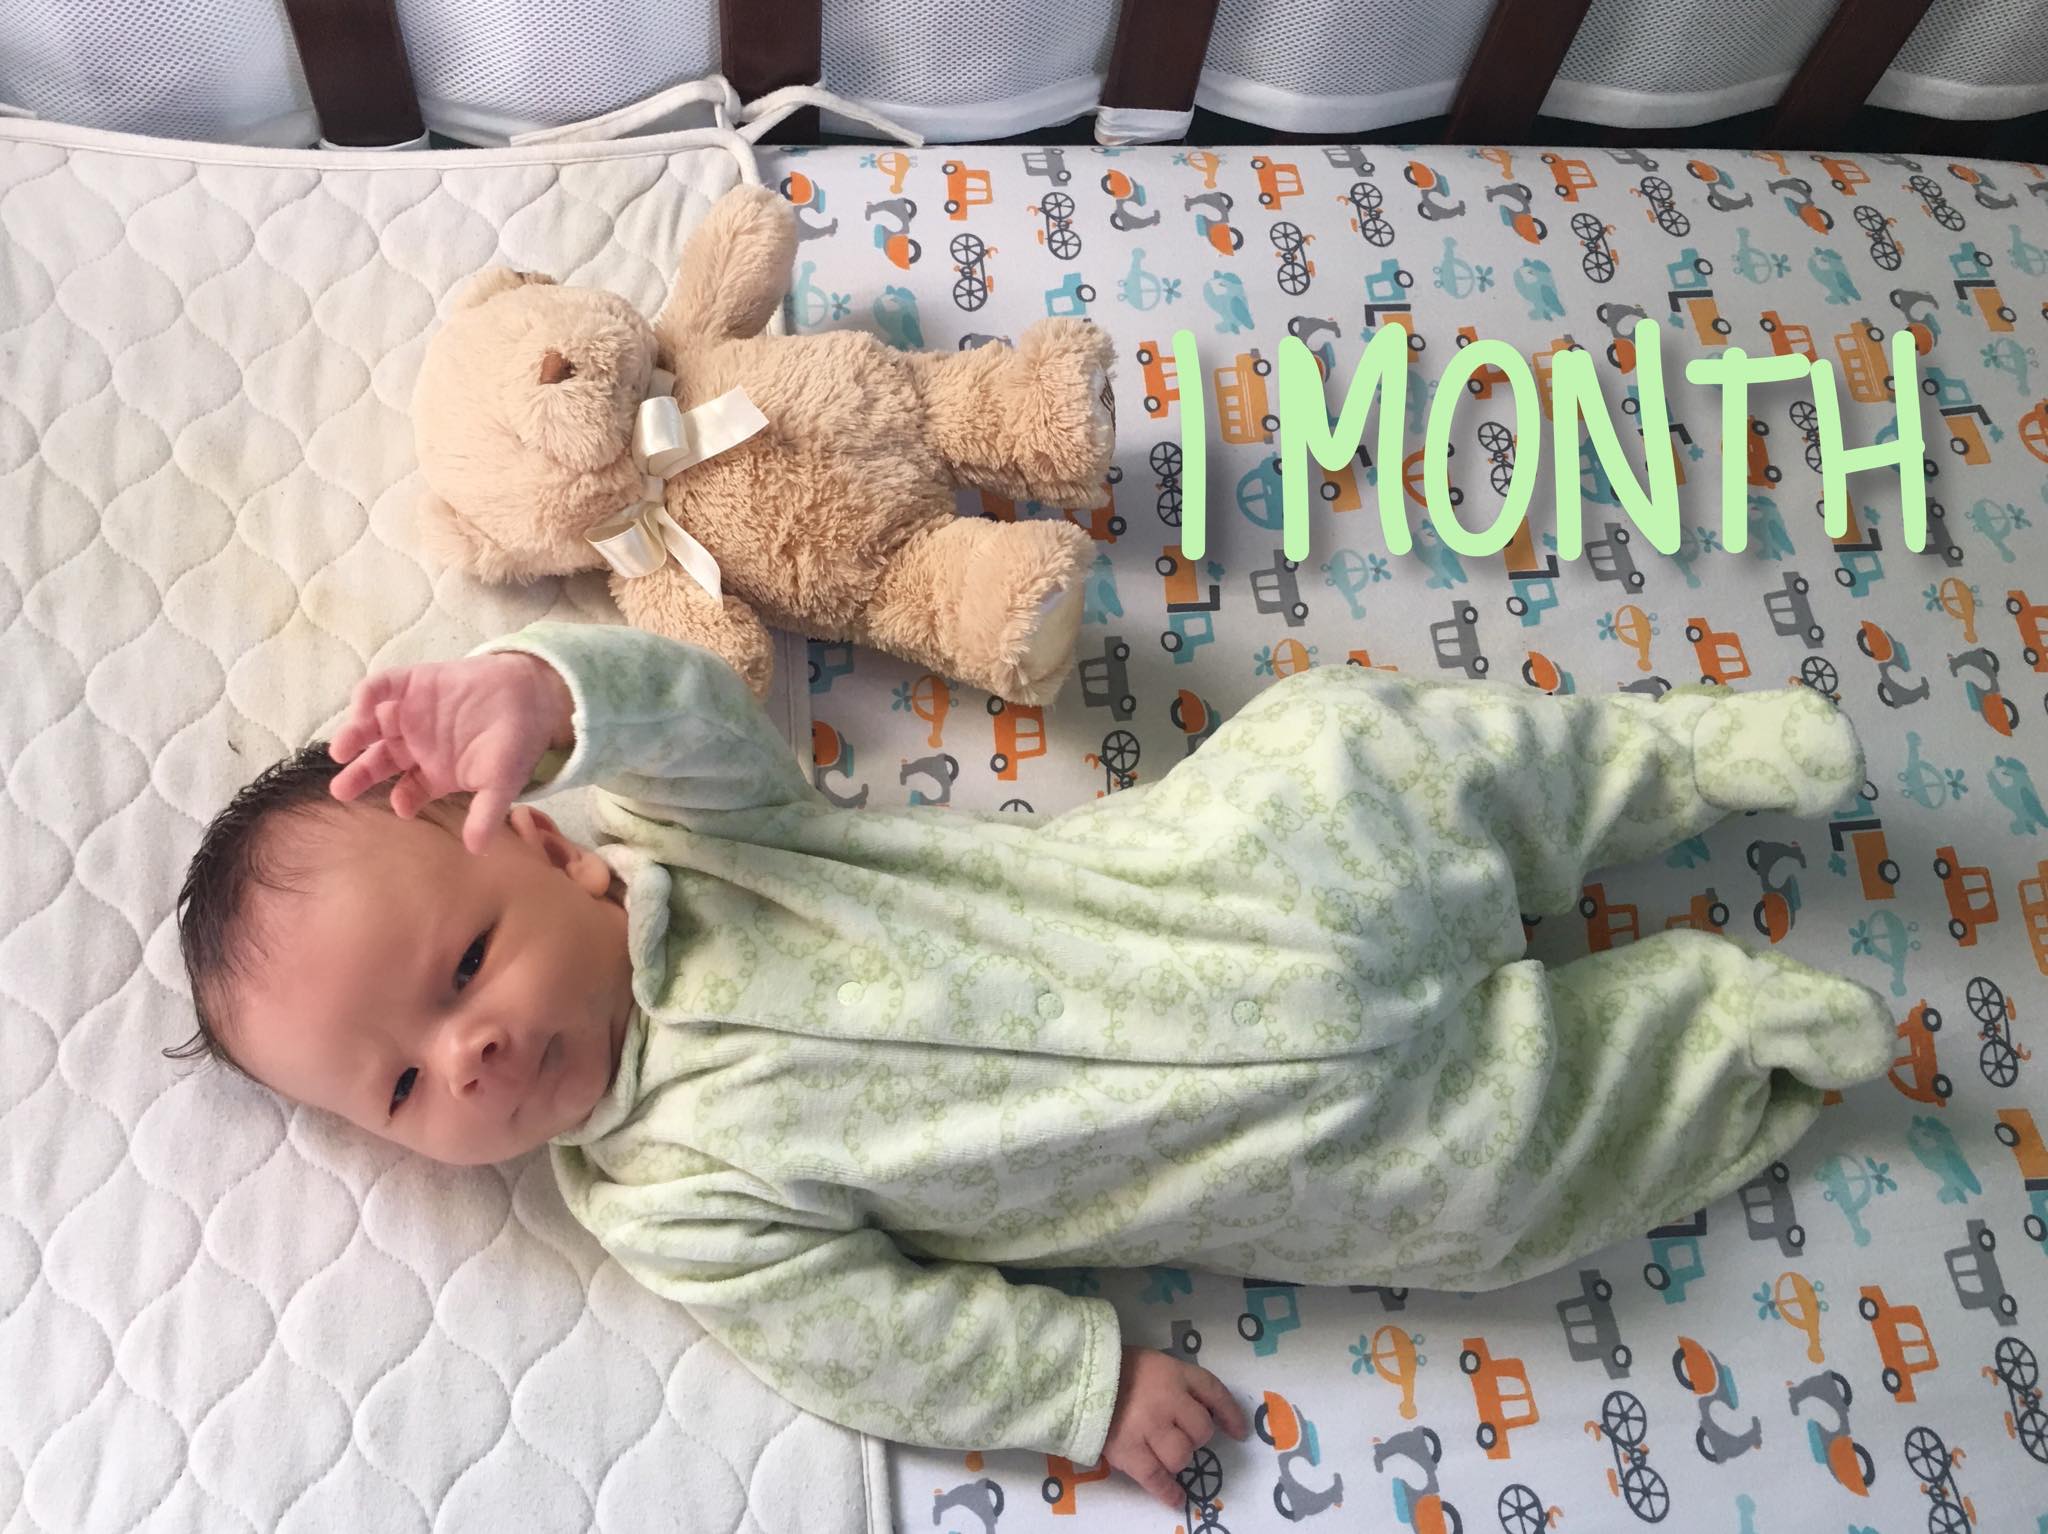 Shiloh is 1 month old